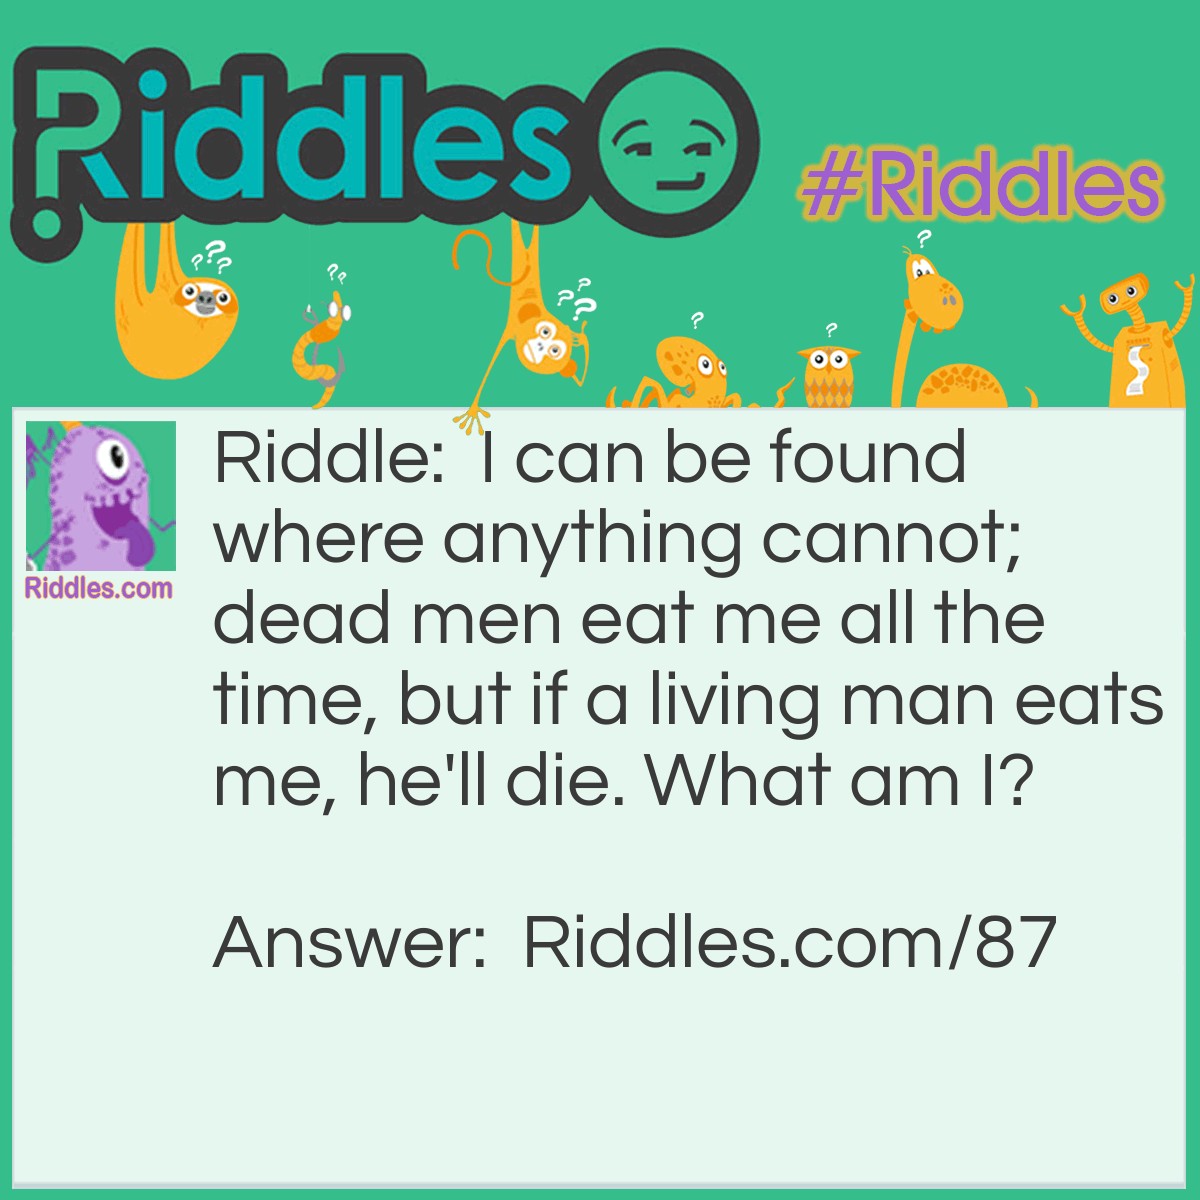 Riddle: I can be found where anything cannot; dead men eat me all the time, but if a living man eats me, he'll die. What am I? Answer: I am nothing.